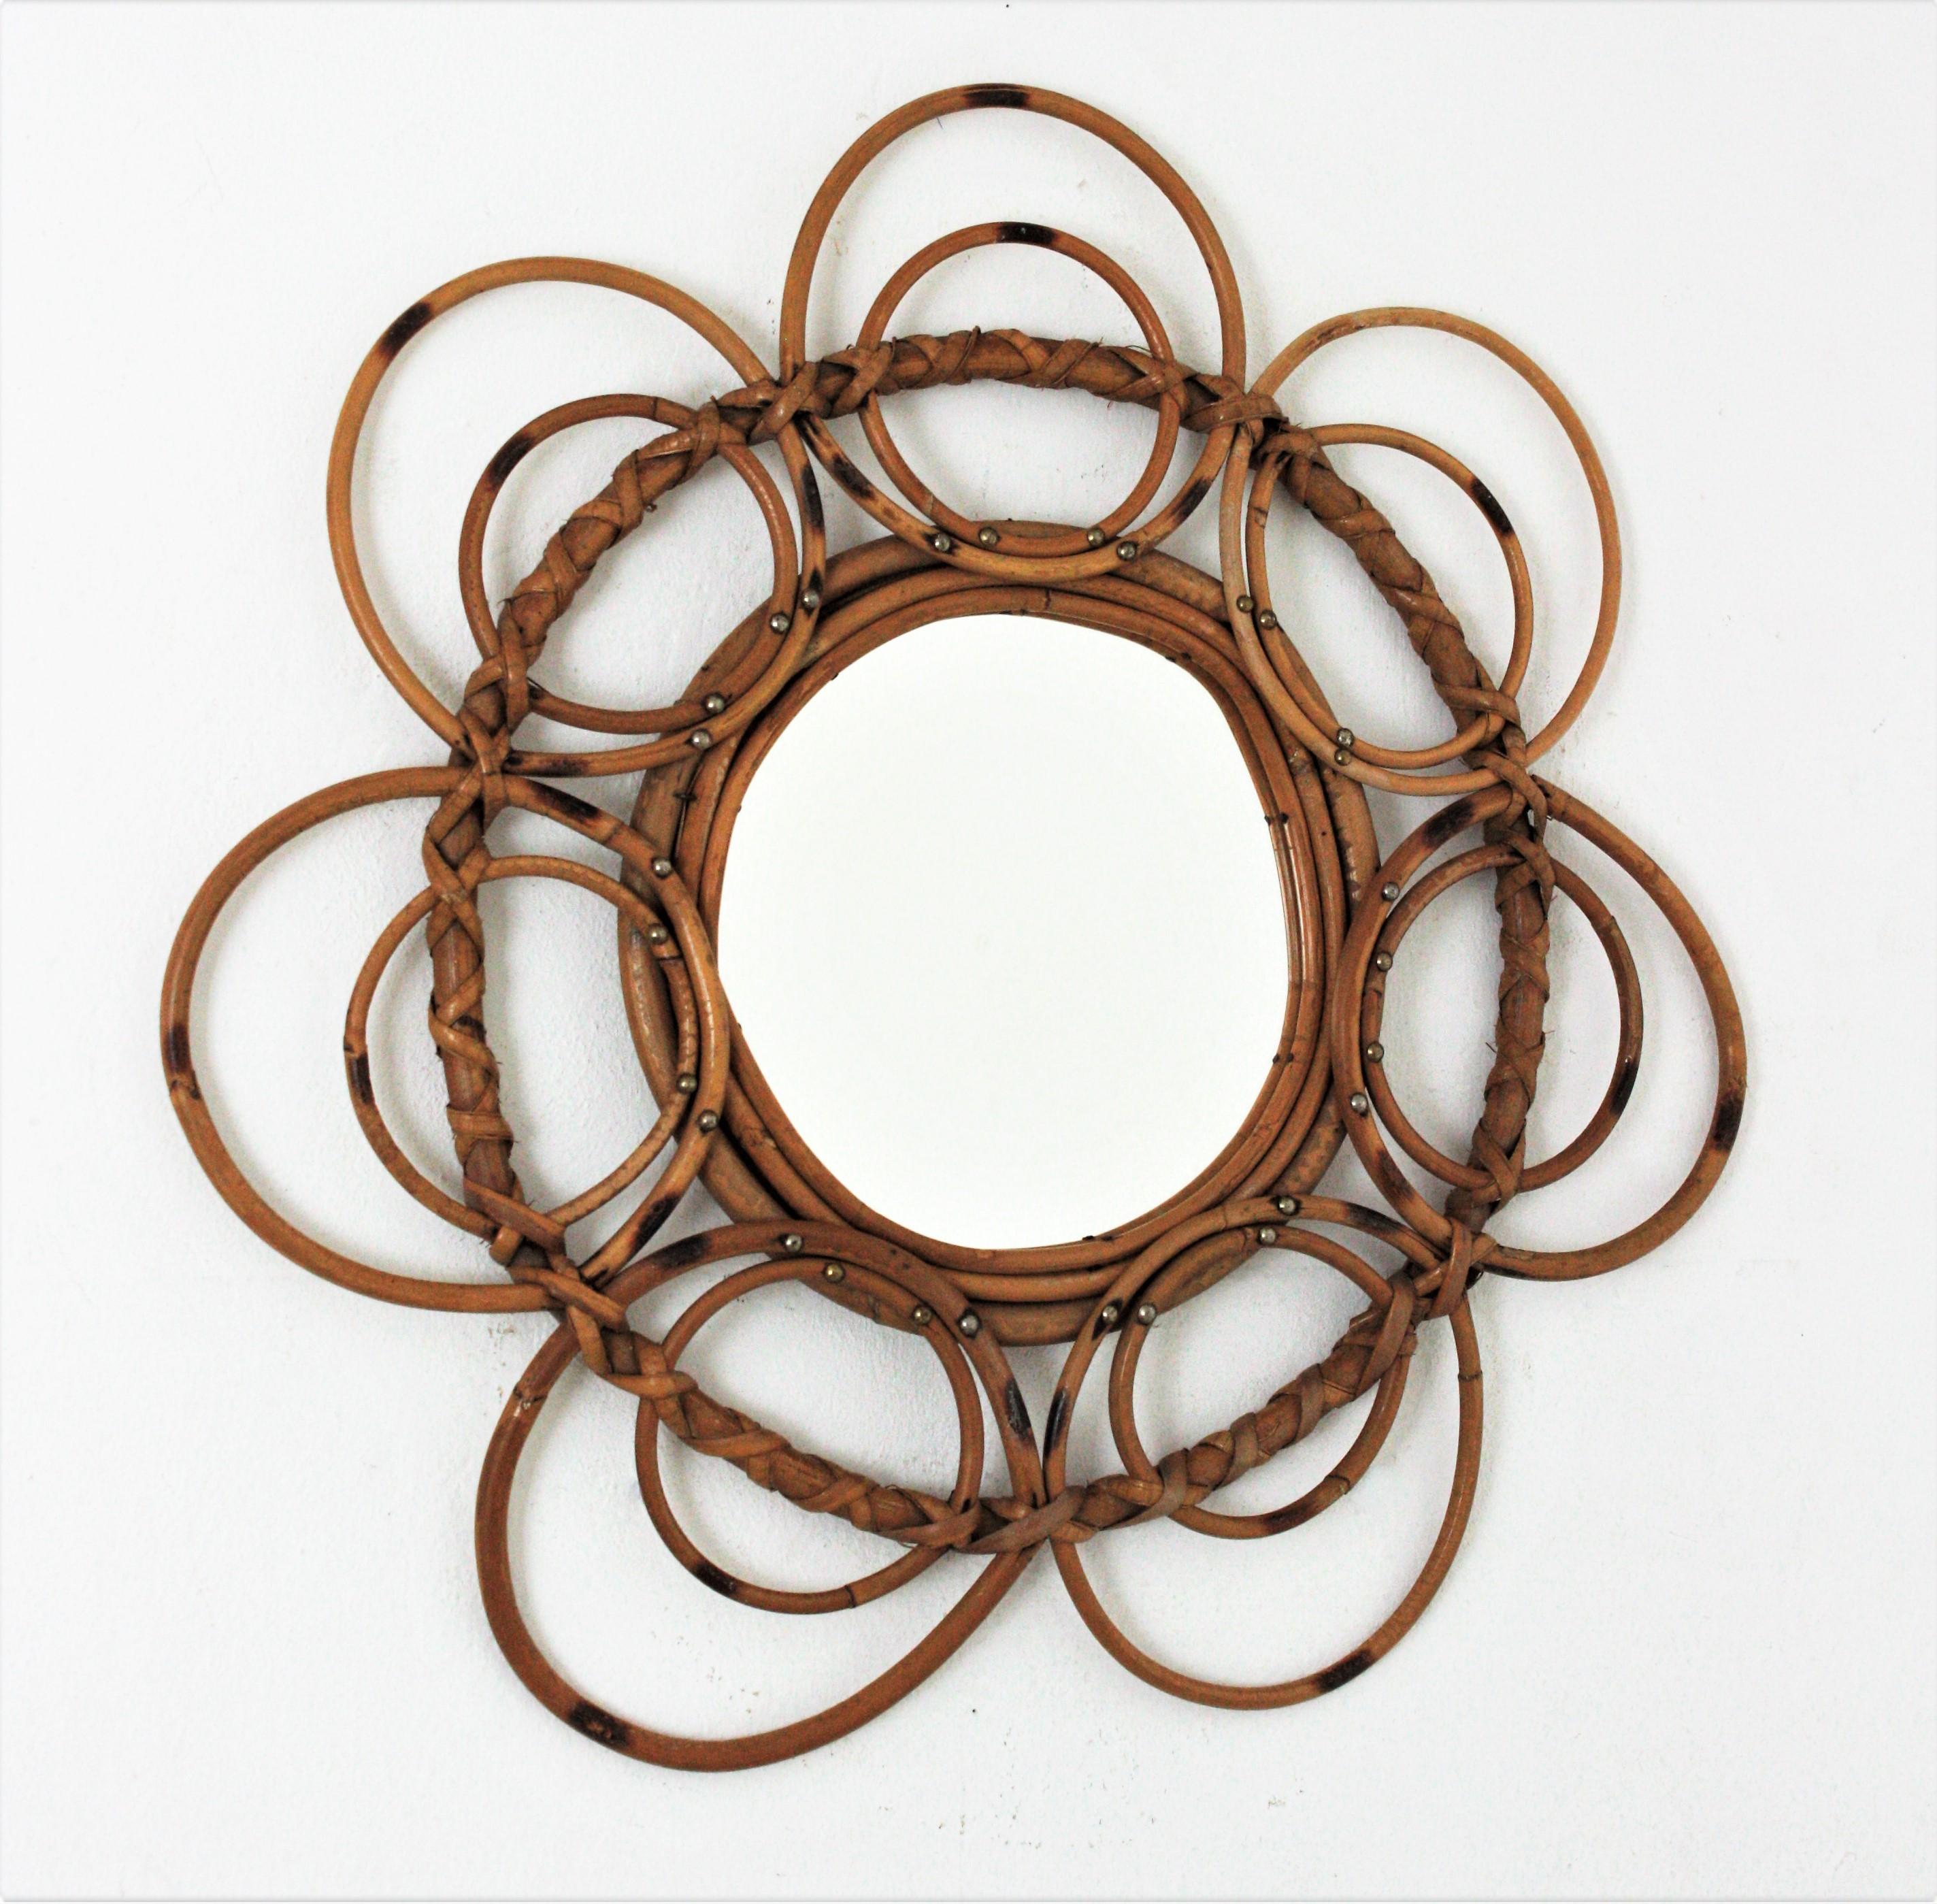 Wall mirror or flower mirror, rattan, bamboo, France, 1960s
French Riviera rattan mirror framed by concentric circles displayed as petals creating a flower shaped mirror.
This mirror has all the taste of the Midcentury french coast style. It will